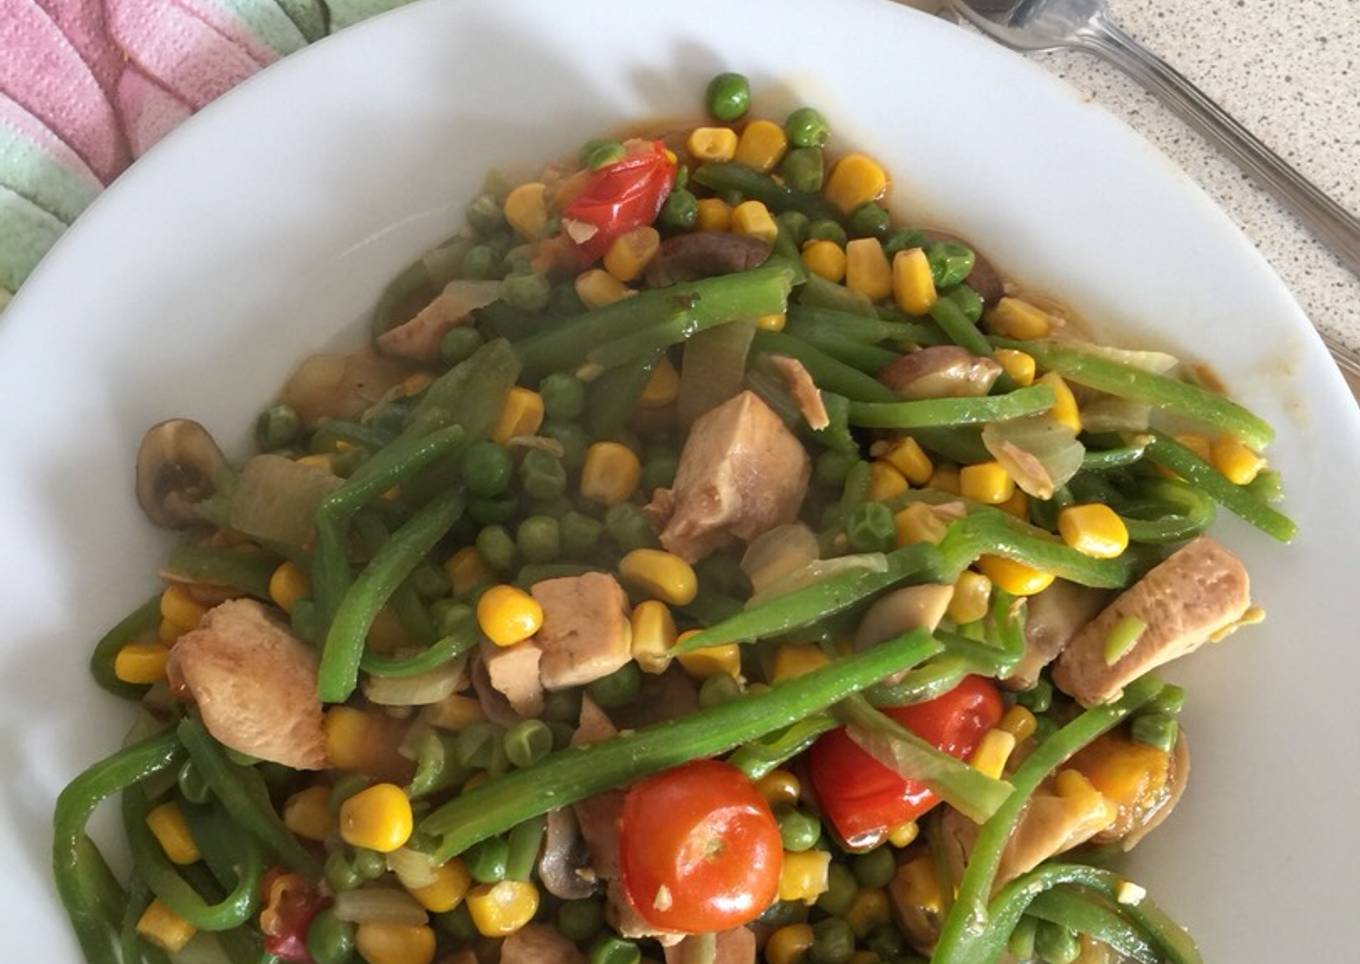 Rainbow Stir-fry with Chicken leftovers